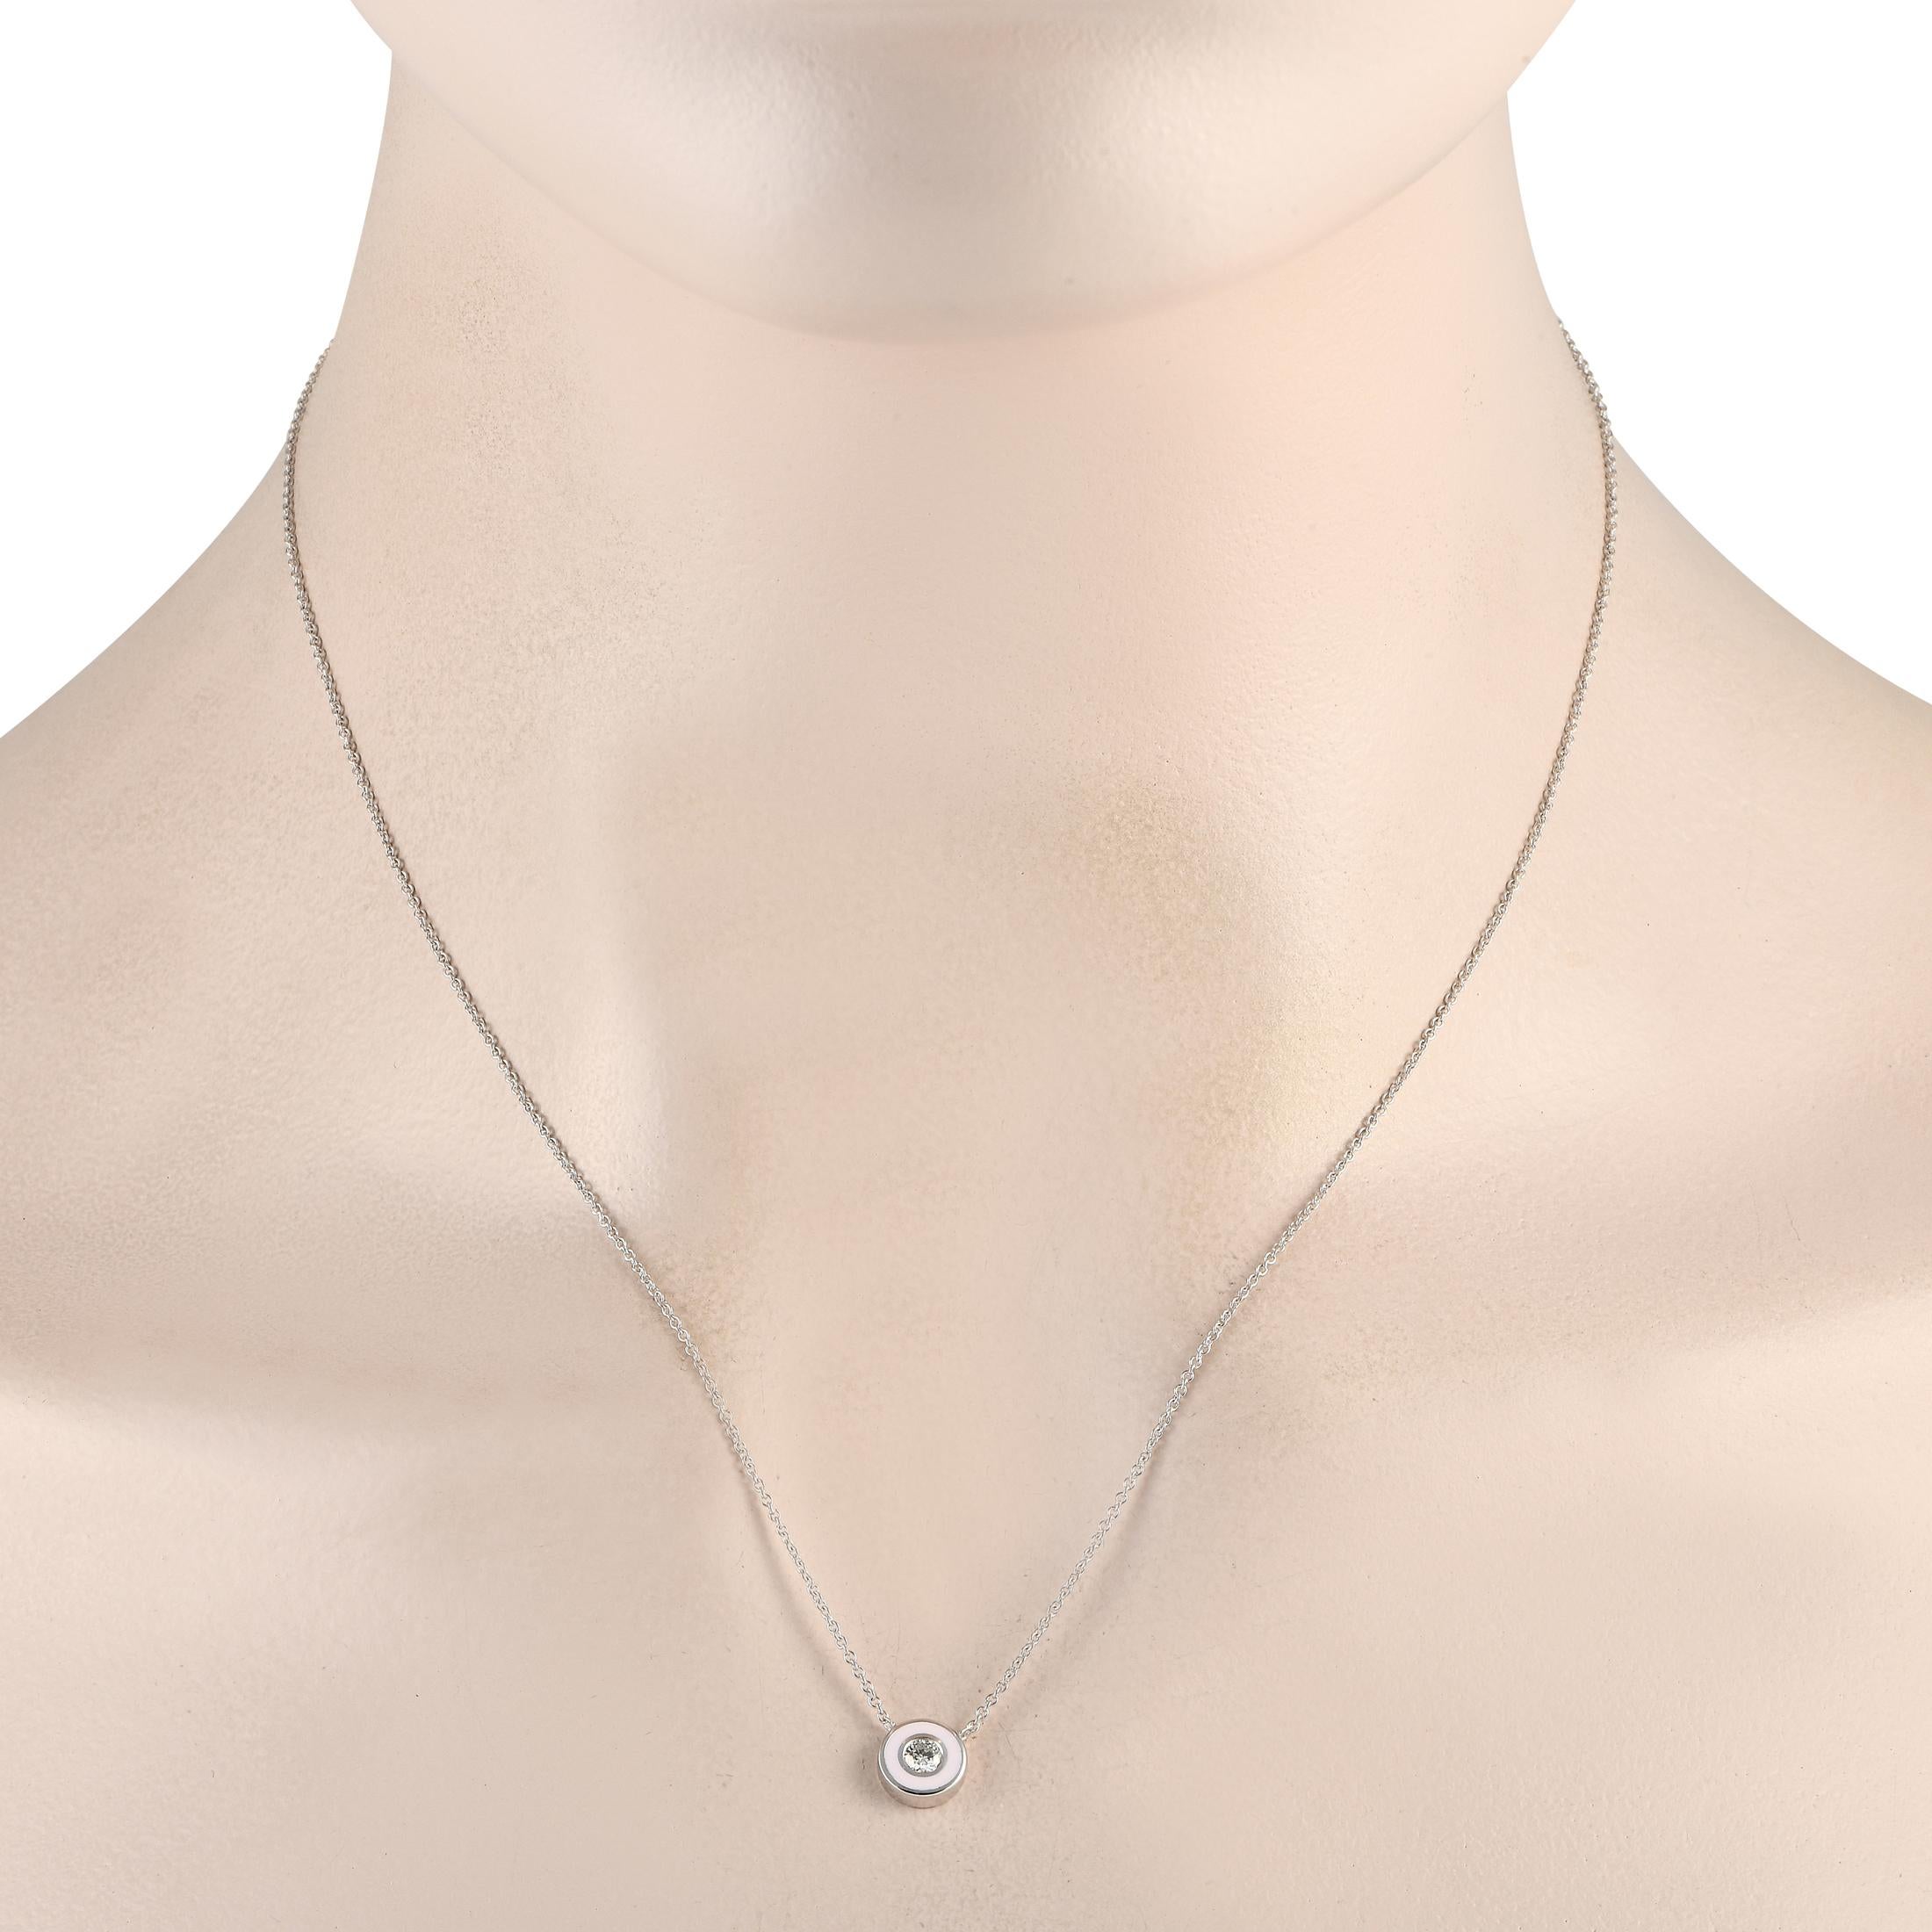 The perfect finishing touch to every outfit. Dot your daily looks with just the right touch of sparkle from this minimalist necklace. It features an 18-long chain in 14K white gold. It has a disc pendant with a bezel-set round diamond at the